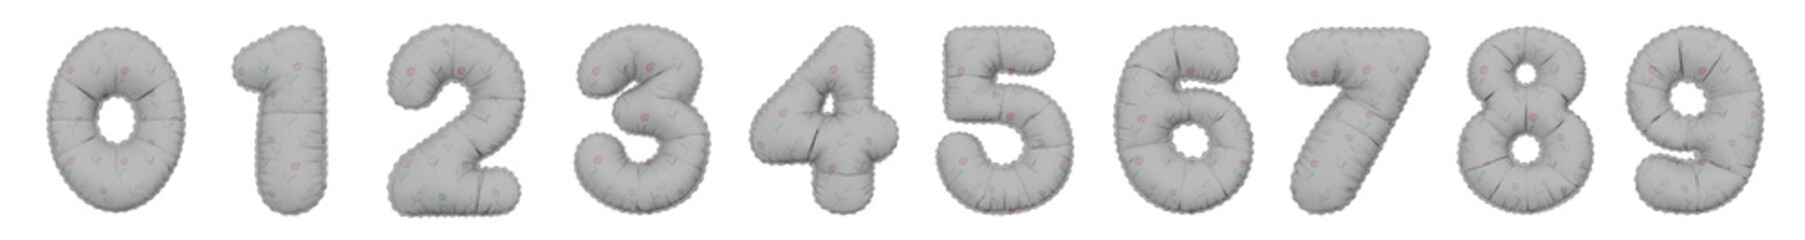 3D Helium Balloon Numbers collection from 0 to 9 with white cotton flower texture